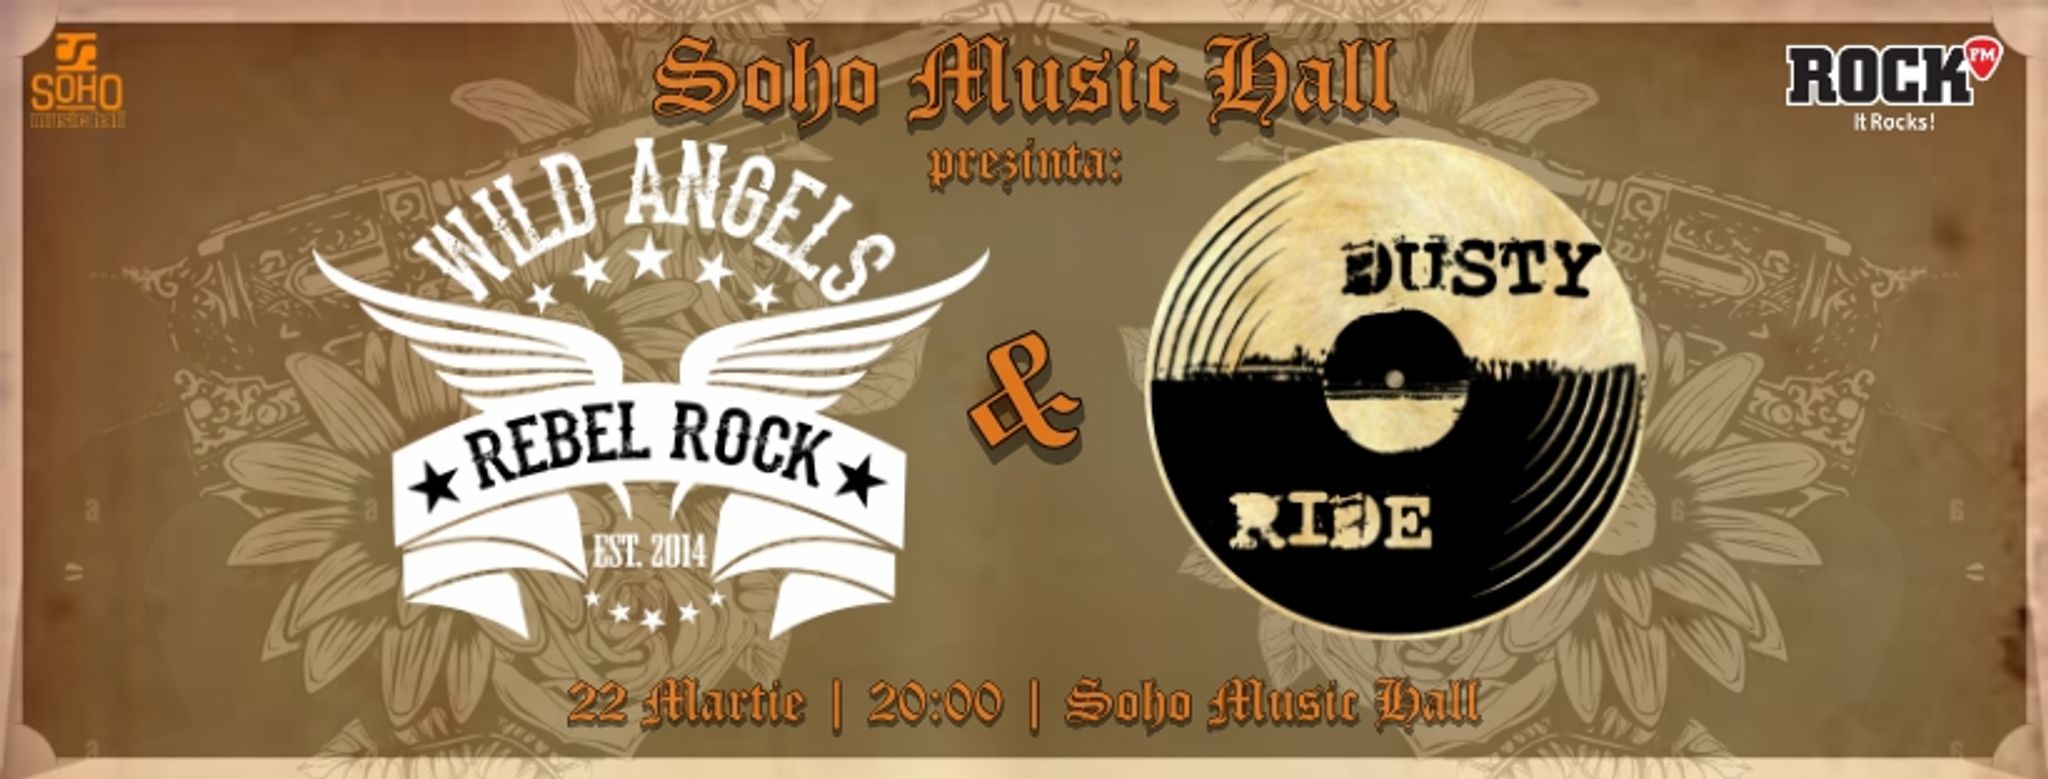 WILD ANGELS si DUSTY RIDE live